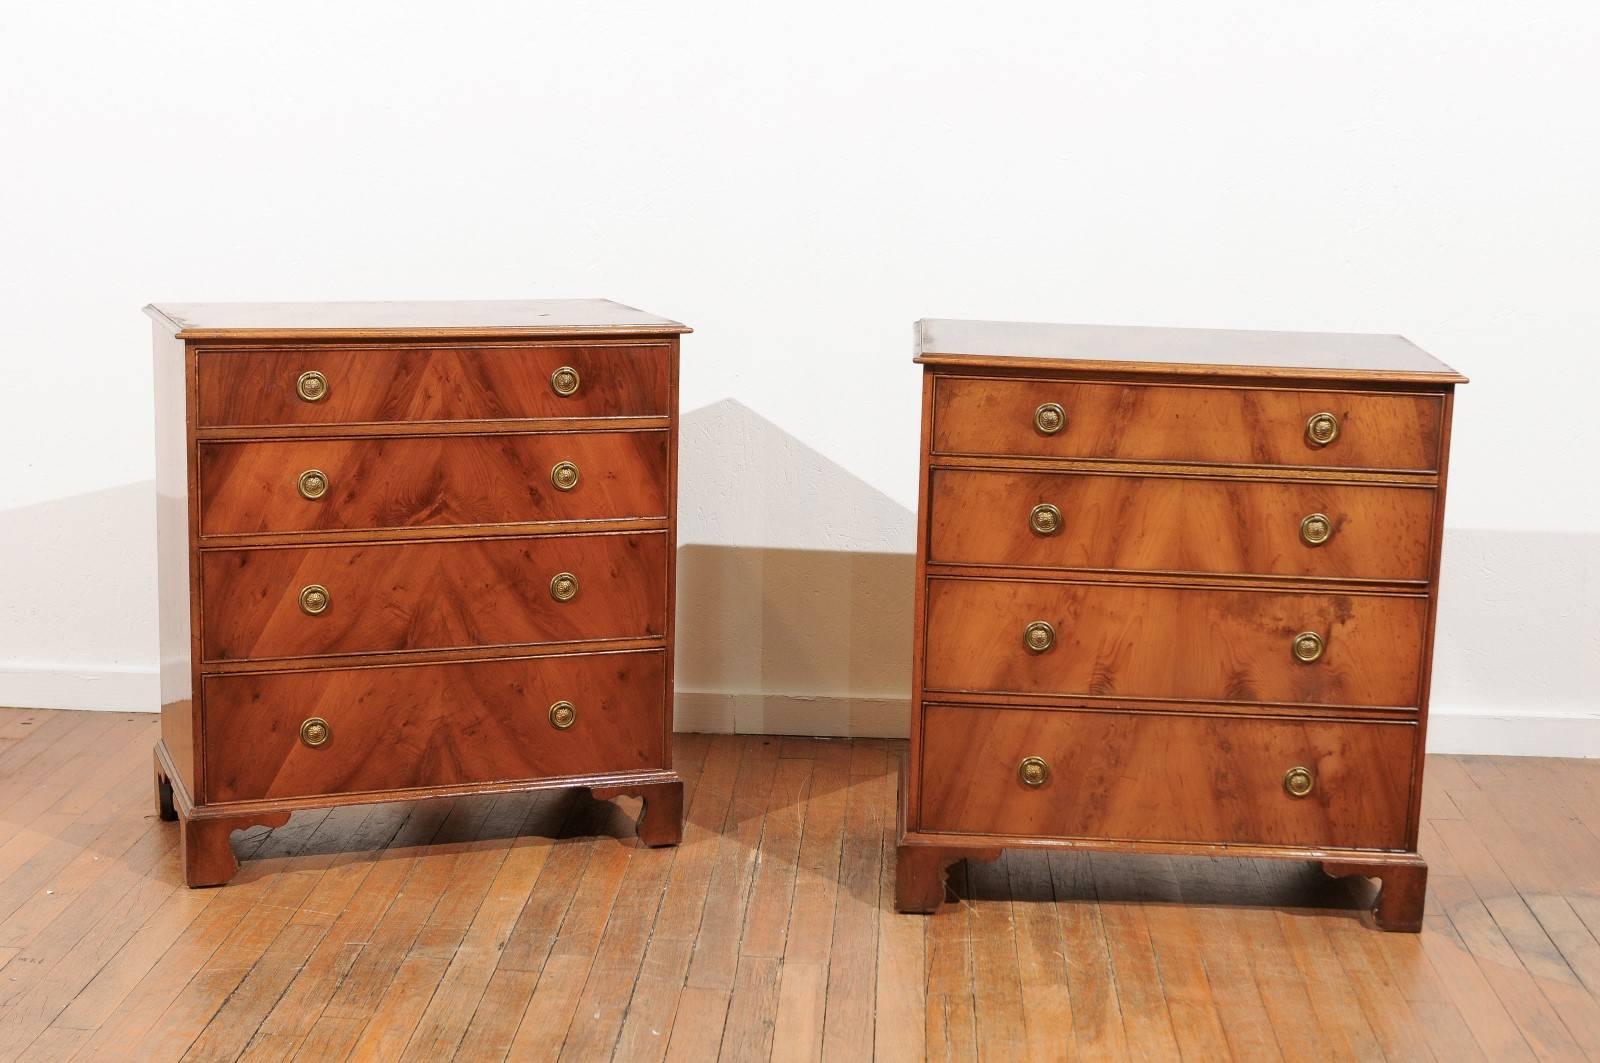 Early 20th century pair of English bachelor chests in the Georgian style and made of flame mahogany veneers. The four graduated drawers have brass ring pulls and back plates. The chests were made in Ipswich, England in the 1920s by Frederick